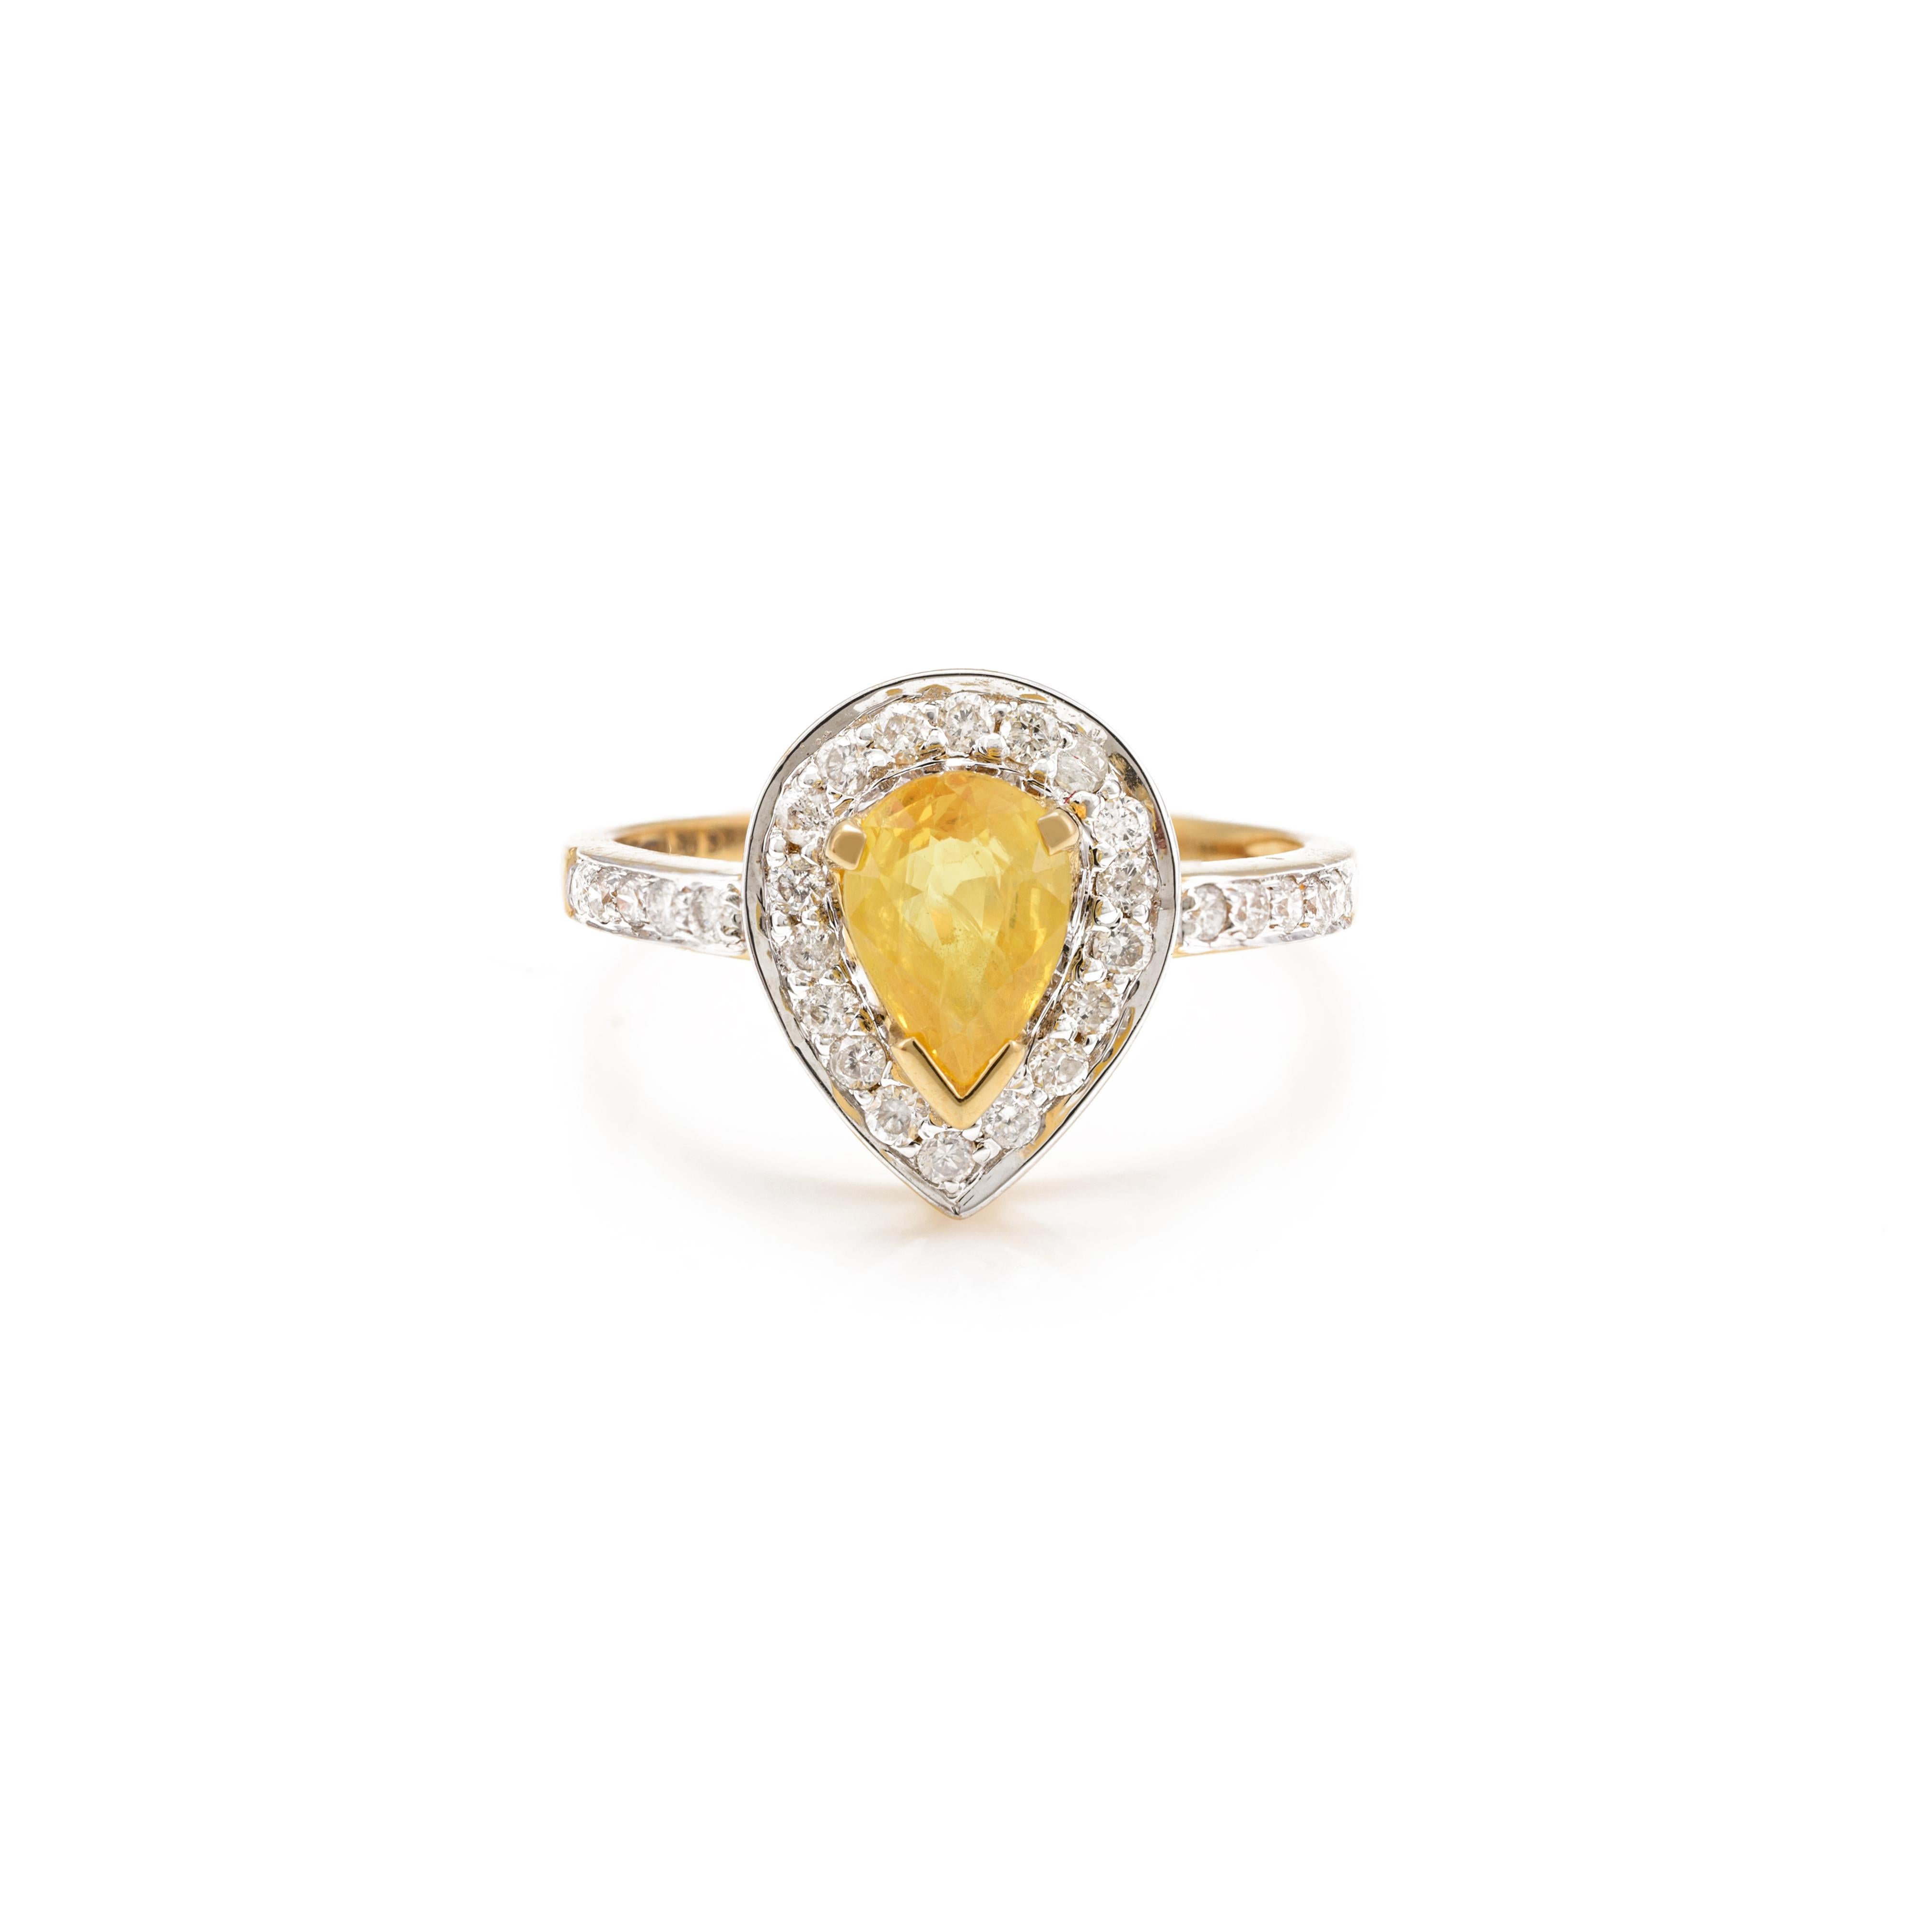 For Sale:  0.89 Ct Pear Cut Yellow Sapphire Diamond 18k Solid Yellow Gold Engagement Ring 7